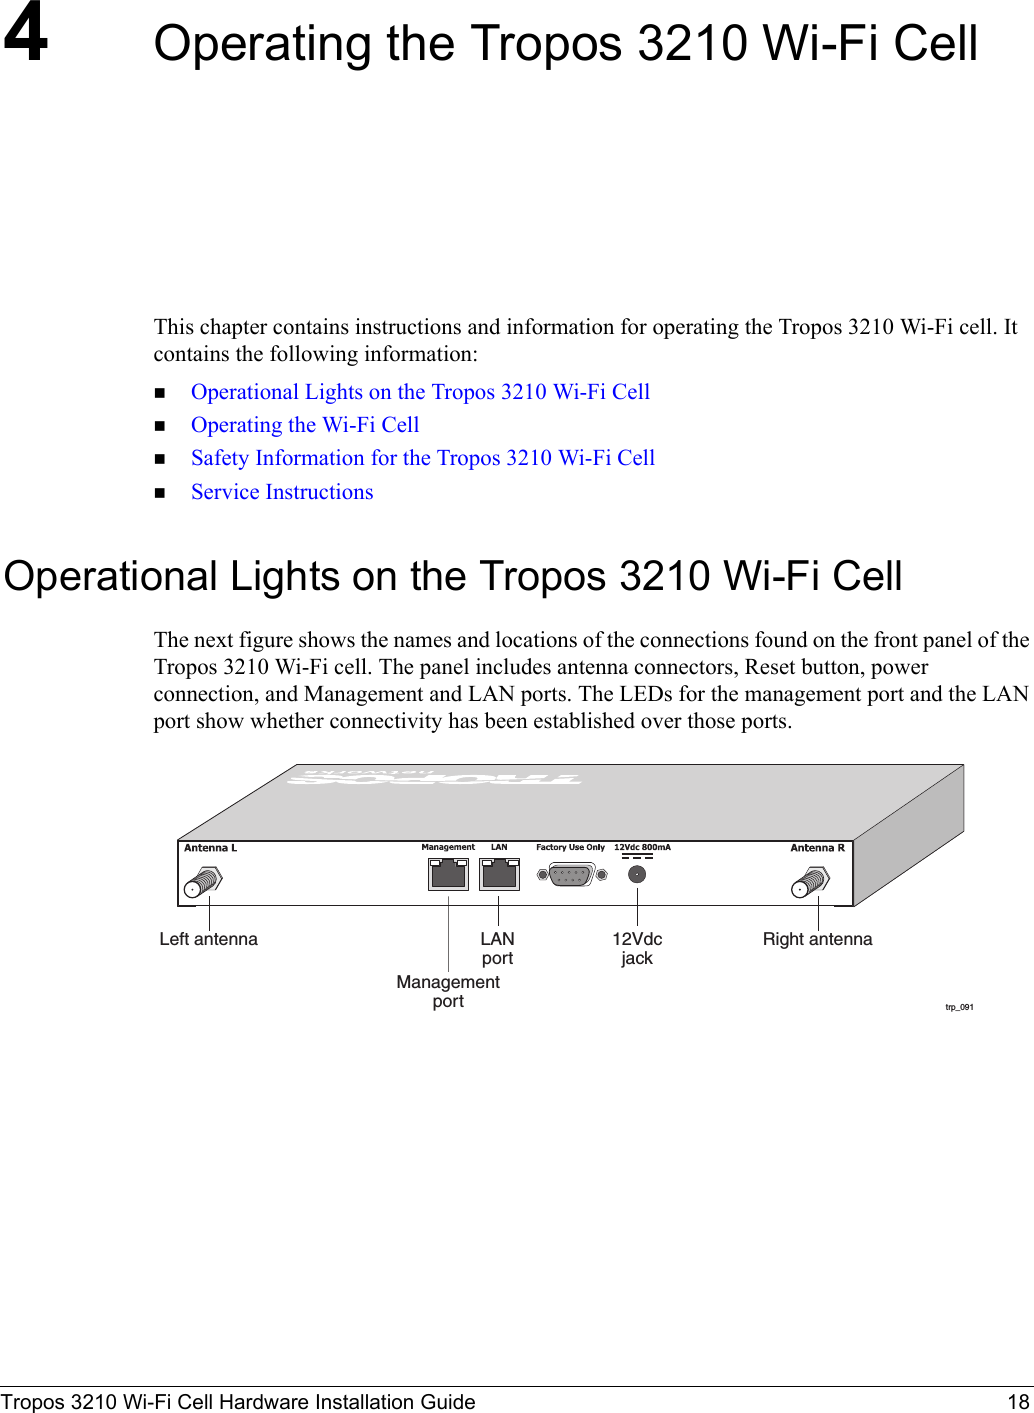 Tropos 3210 Wi-Fi Cell Hardware Installation Guide 184Operating the Tropos 3210 Wi-Fi CellThis chapter contains instructions and information for operating the Tropos 3210 Wi-Fi cell. It contains the following information:Operational Lights on the Tropos 3210 Wi-Fi CellOperating the Wi-Fi CellSafety Information for the Tropos 3210 Wi-Fi CellService InstructionsOperational Lights on the Tropos 3210 Wi-Fi CellThe next figure shows the names and locations of the connections found on the front panel of the Tropos 3210 Wi-Fi cell. The panel includes antenna connectors, Reset button, power connection, and Management and LAN ports. The LEDs for the management port and the LAN port show whether connectivity has been established over those ports.trp_091Left antenna Right antennaManagementport12VdcjackLANport